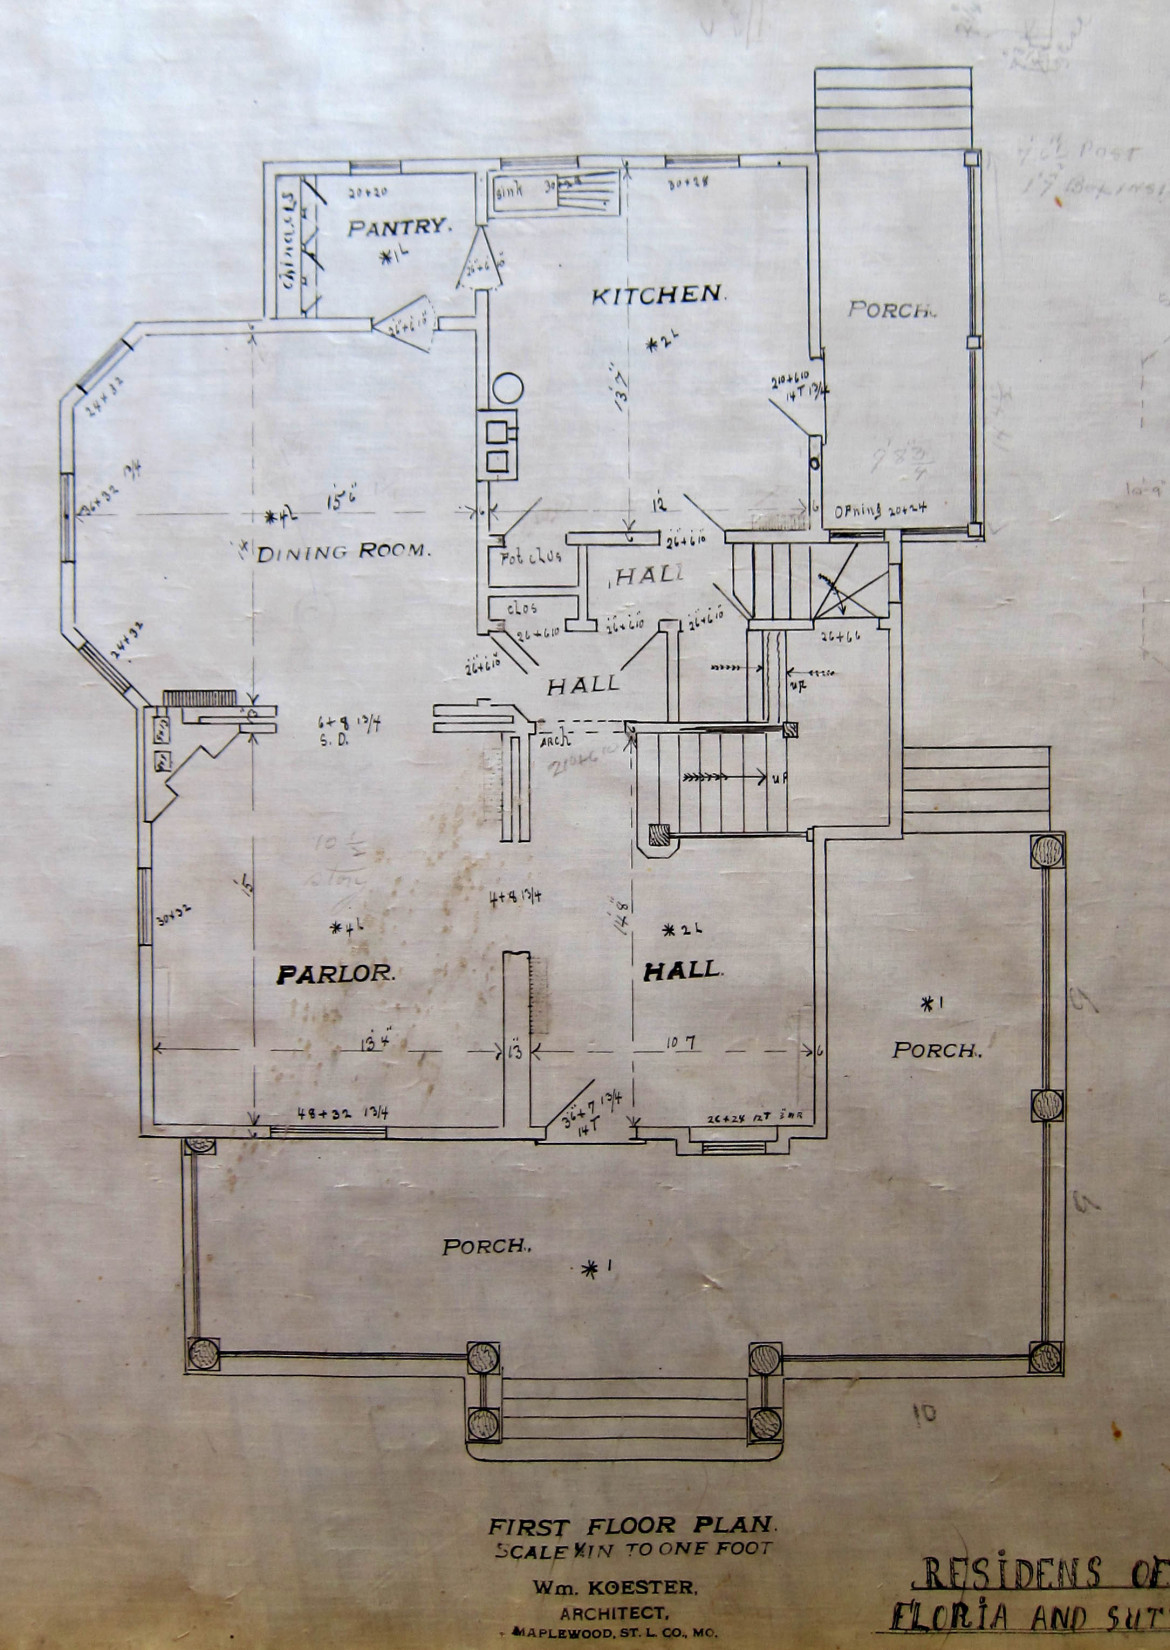 The first floor plan of Koester's home at 7395 Flora.  From the collection of Jim and Beth Abeln.